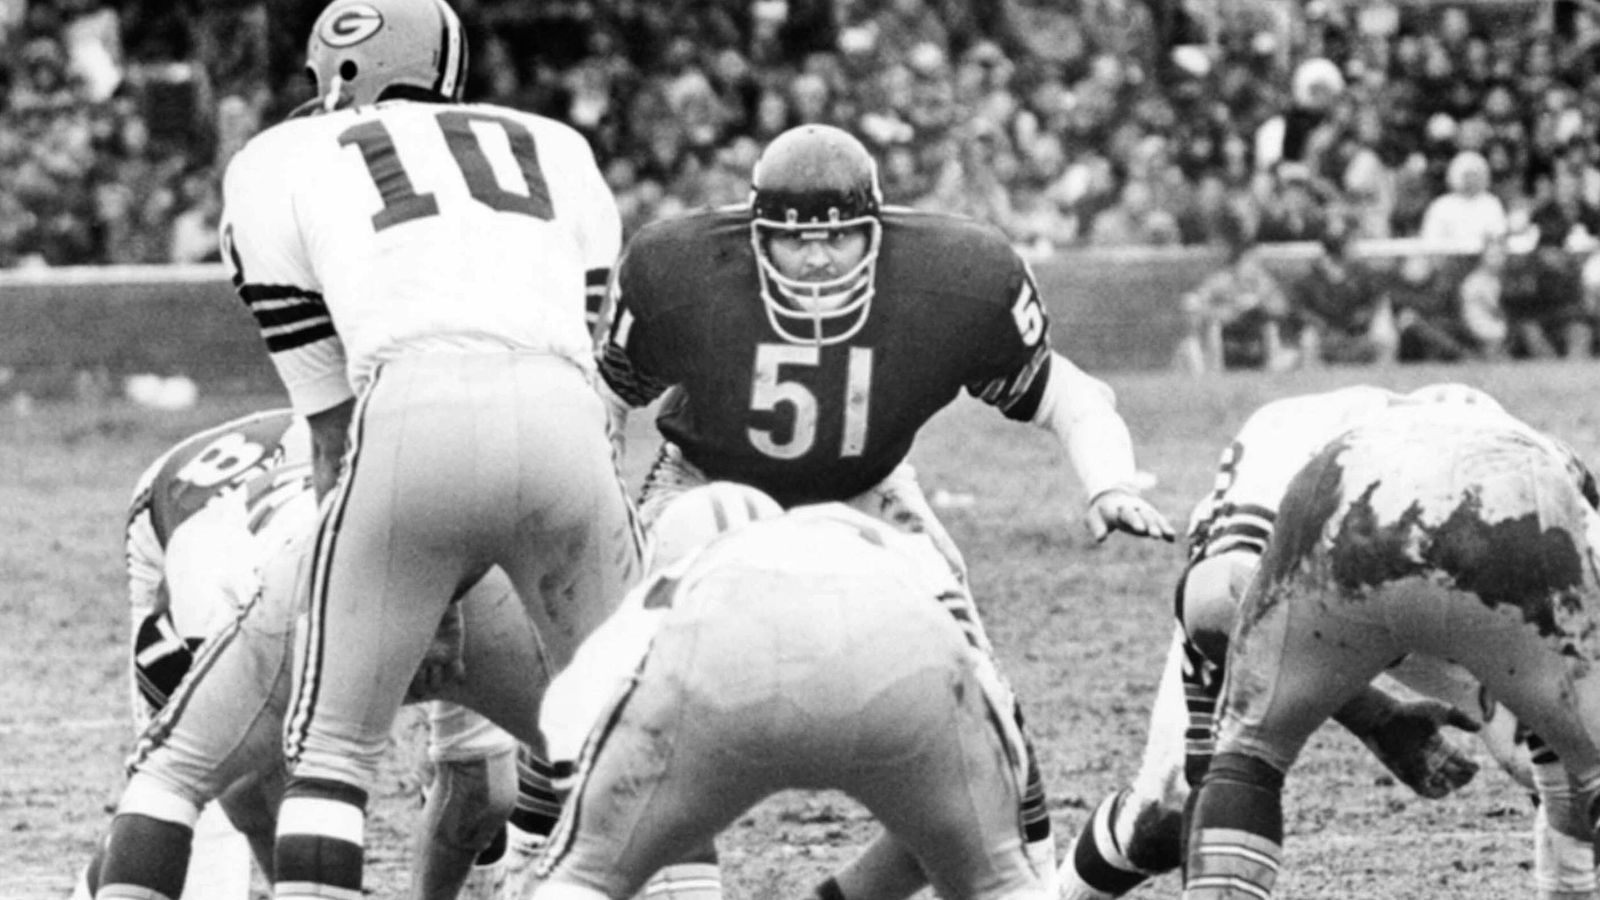 
                <strong>Dick Butkus</strong><br>
                Aktiv: 1965 - 1973Position: LinebackerTeam: Chicago BearsErfolge: 8x Pro Bowl, 2x Defensive Player of the Year
              